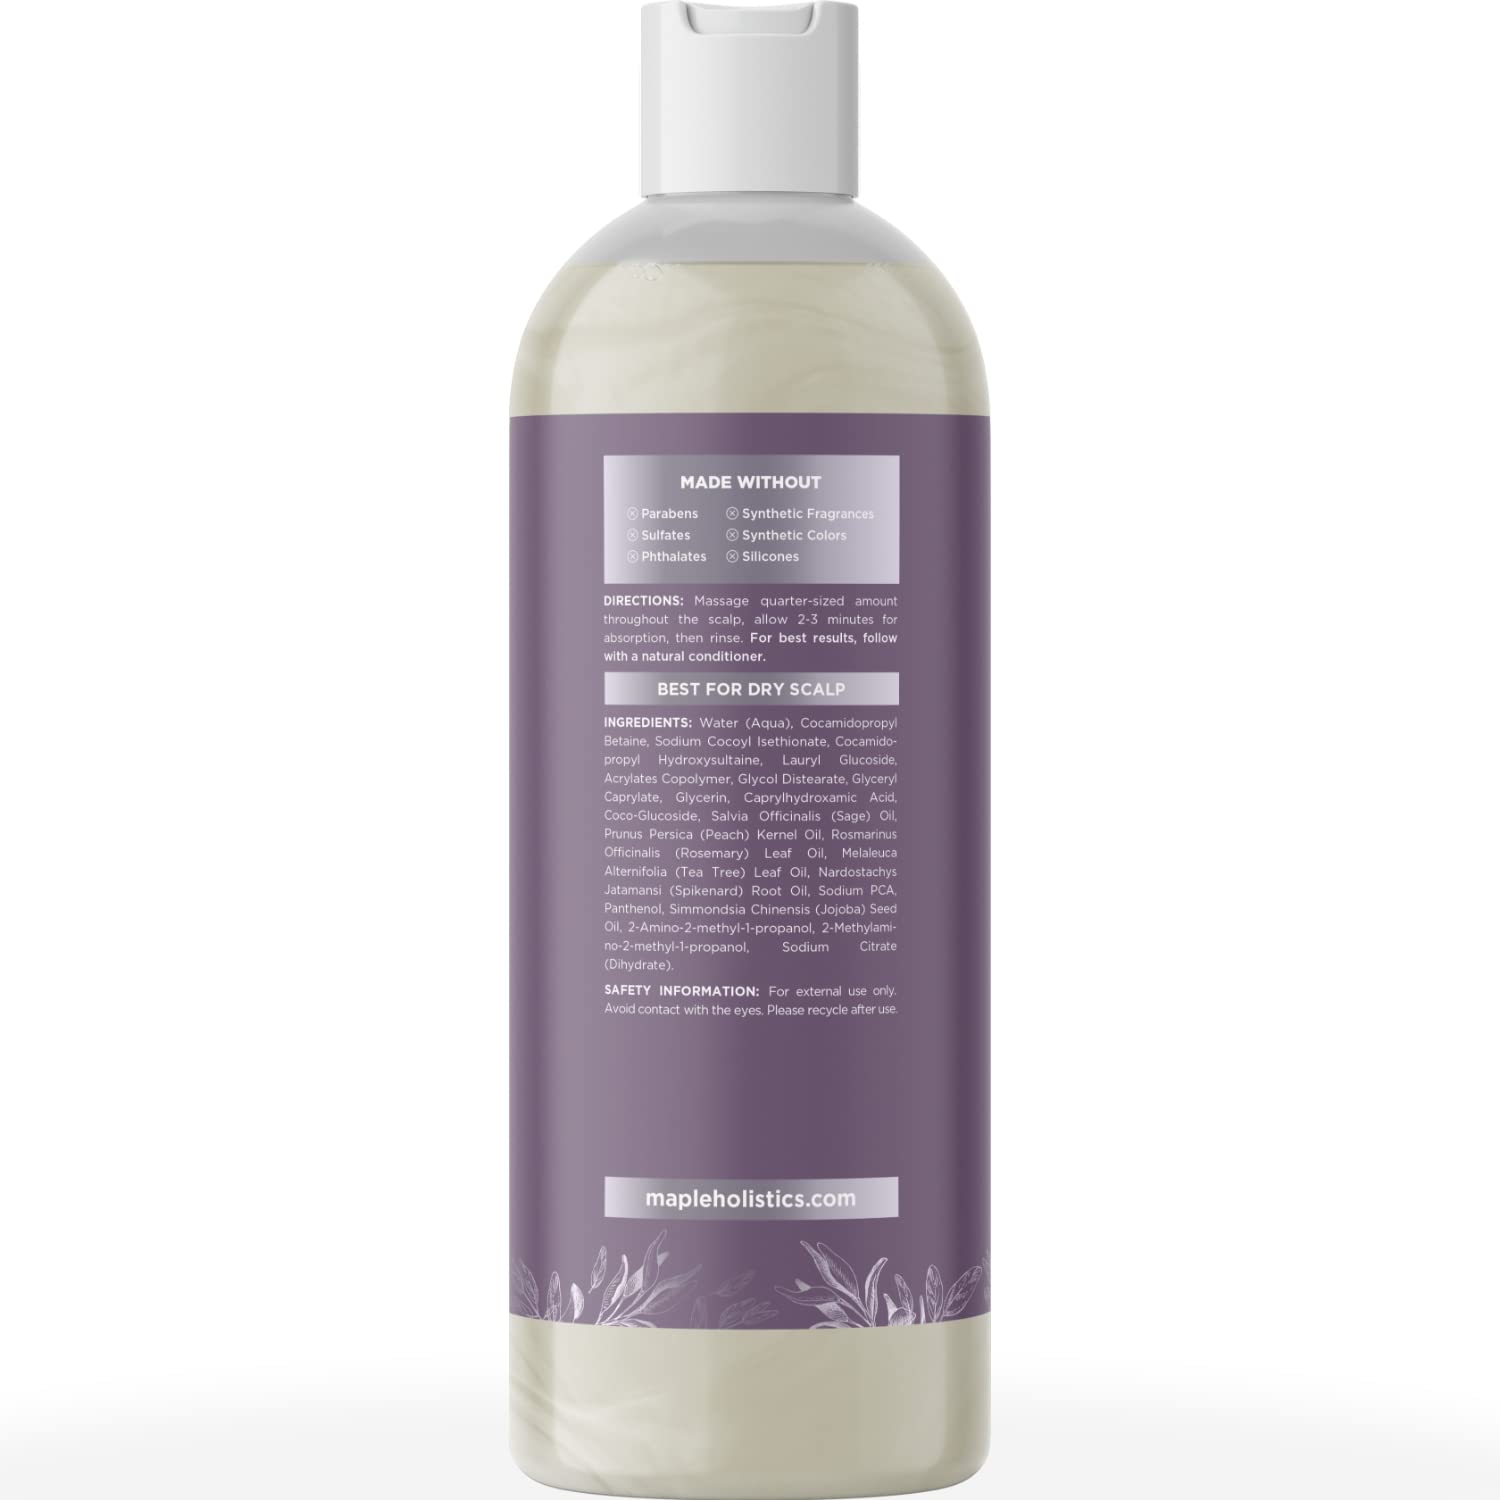 Clarifying Shampoo for Oily Hair and Scalp - Sulfate Free Shampoo with Rosemary Oil Sage and Tea Tree Oil for Hair and Scalp Cleanser - Dry Scalp Shampoo for Men and Women, 8 fl oz - image 5 of 7